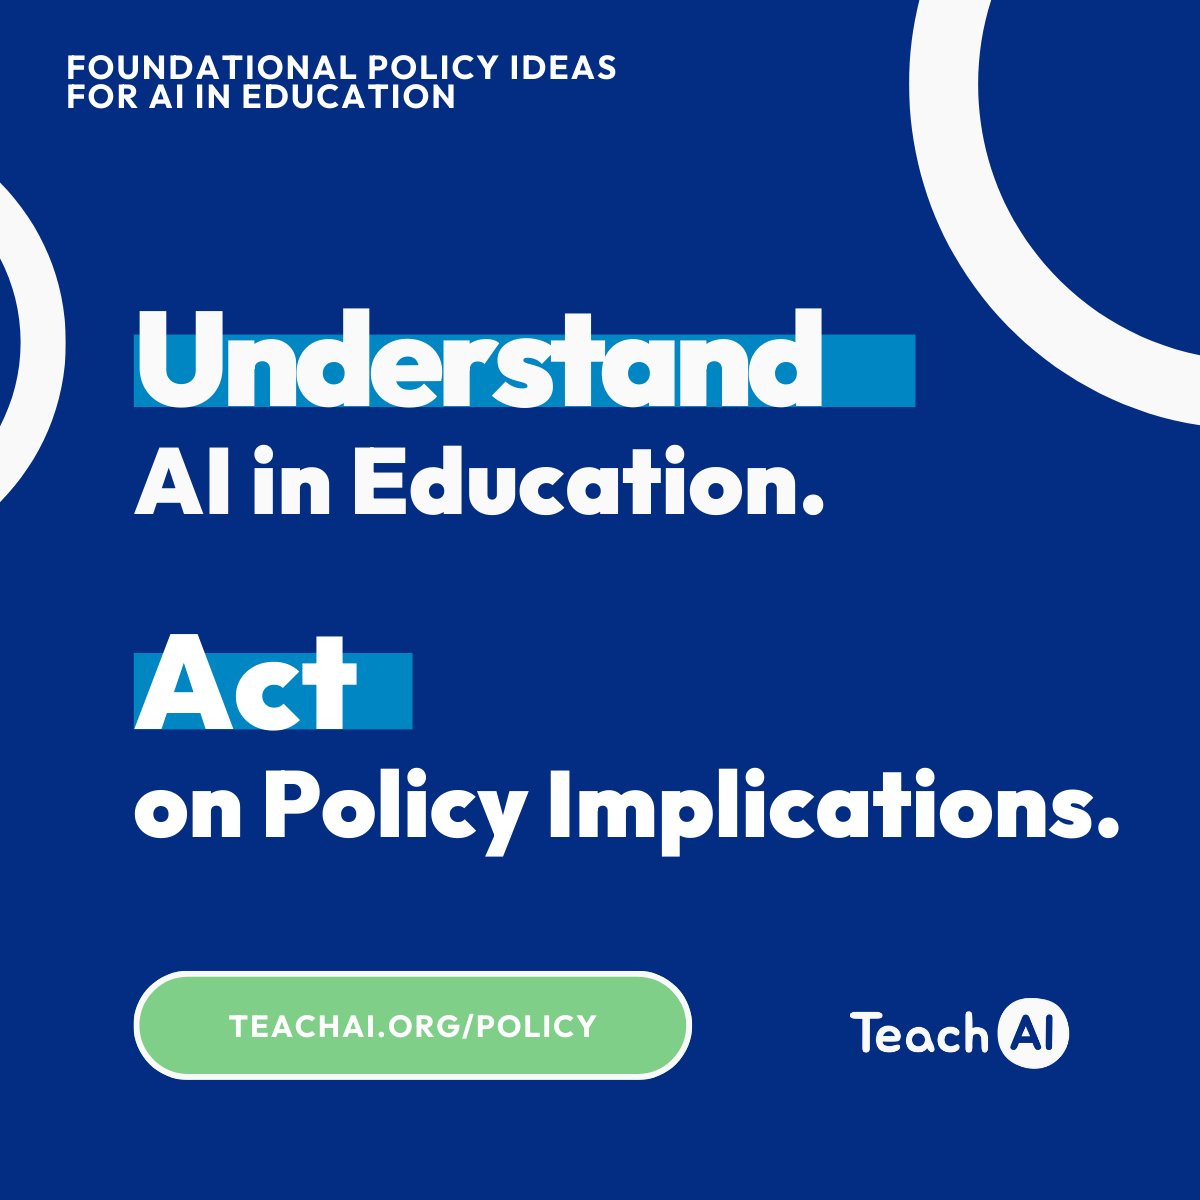 RSVP for our webinar! 🤓 AI is reshaping education and the workforce, necessitating thoughtful policy considerations. Join experts in education and policy as we discuss AI. 🤖 Options available for 9 a.m. ET and 3 p.m. ET. Register here: brnw.ch/21wJAB3 #teachAI